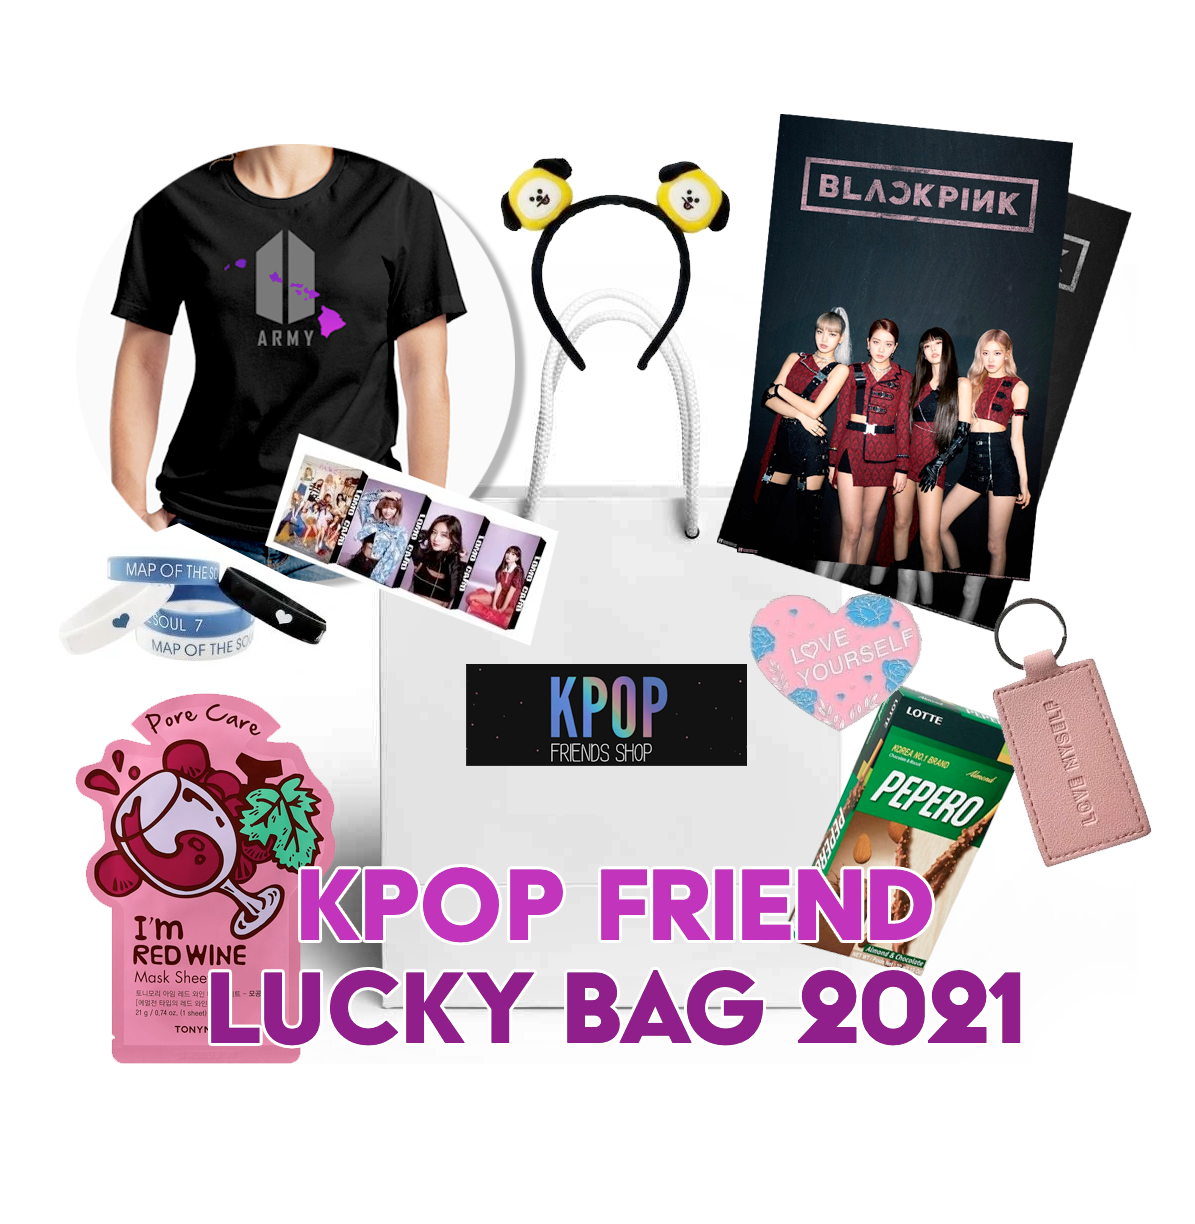 [🎁Limited 100 bags only] Kpop Friend Lucky Bag 2023 | Mysterybag